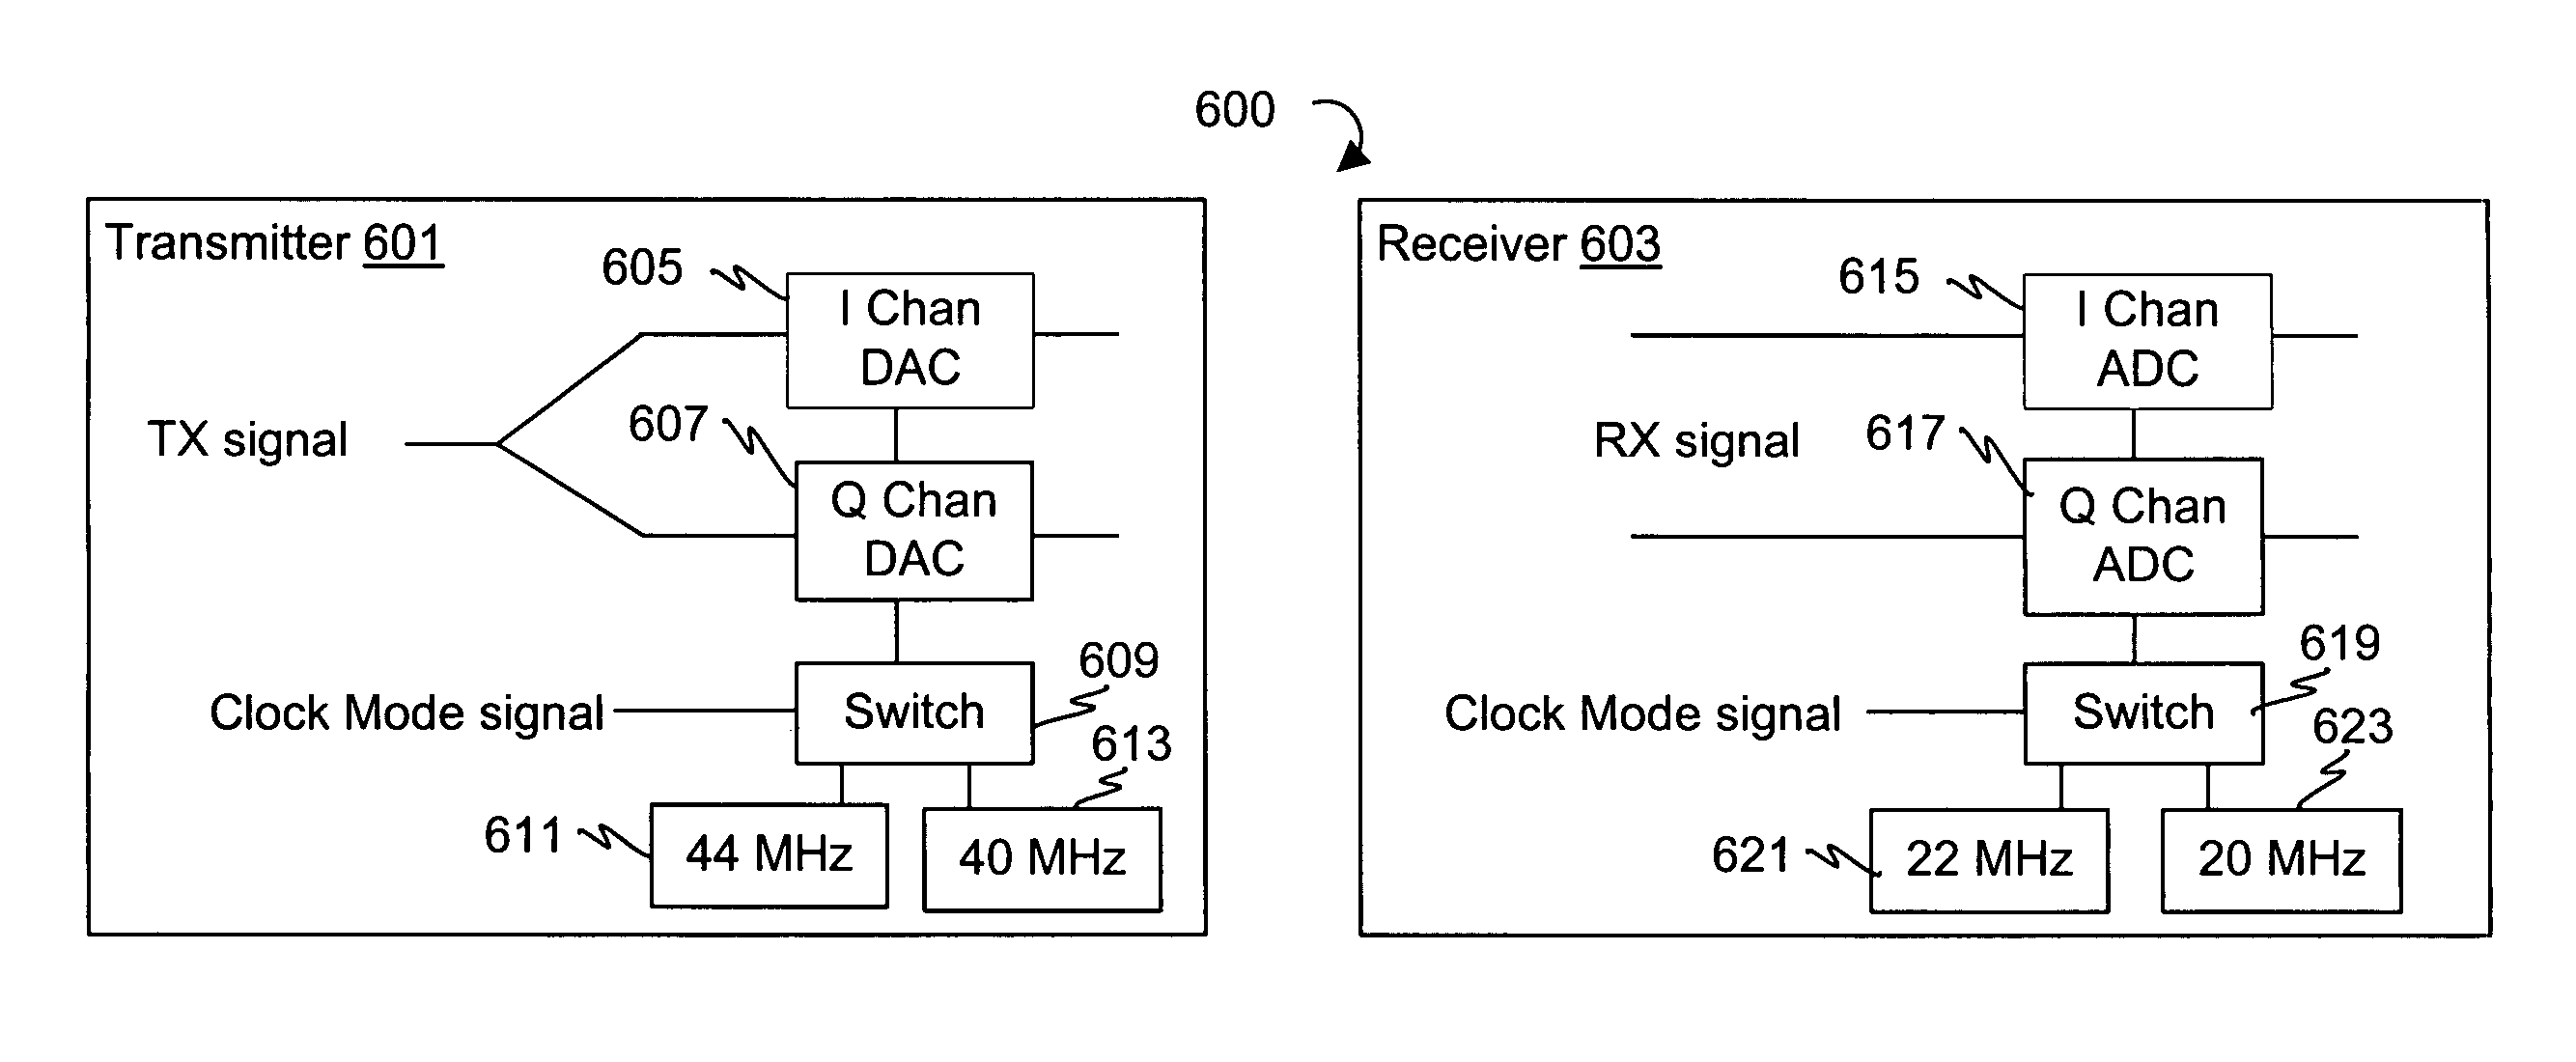 Dual packet configuration for wireless communications